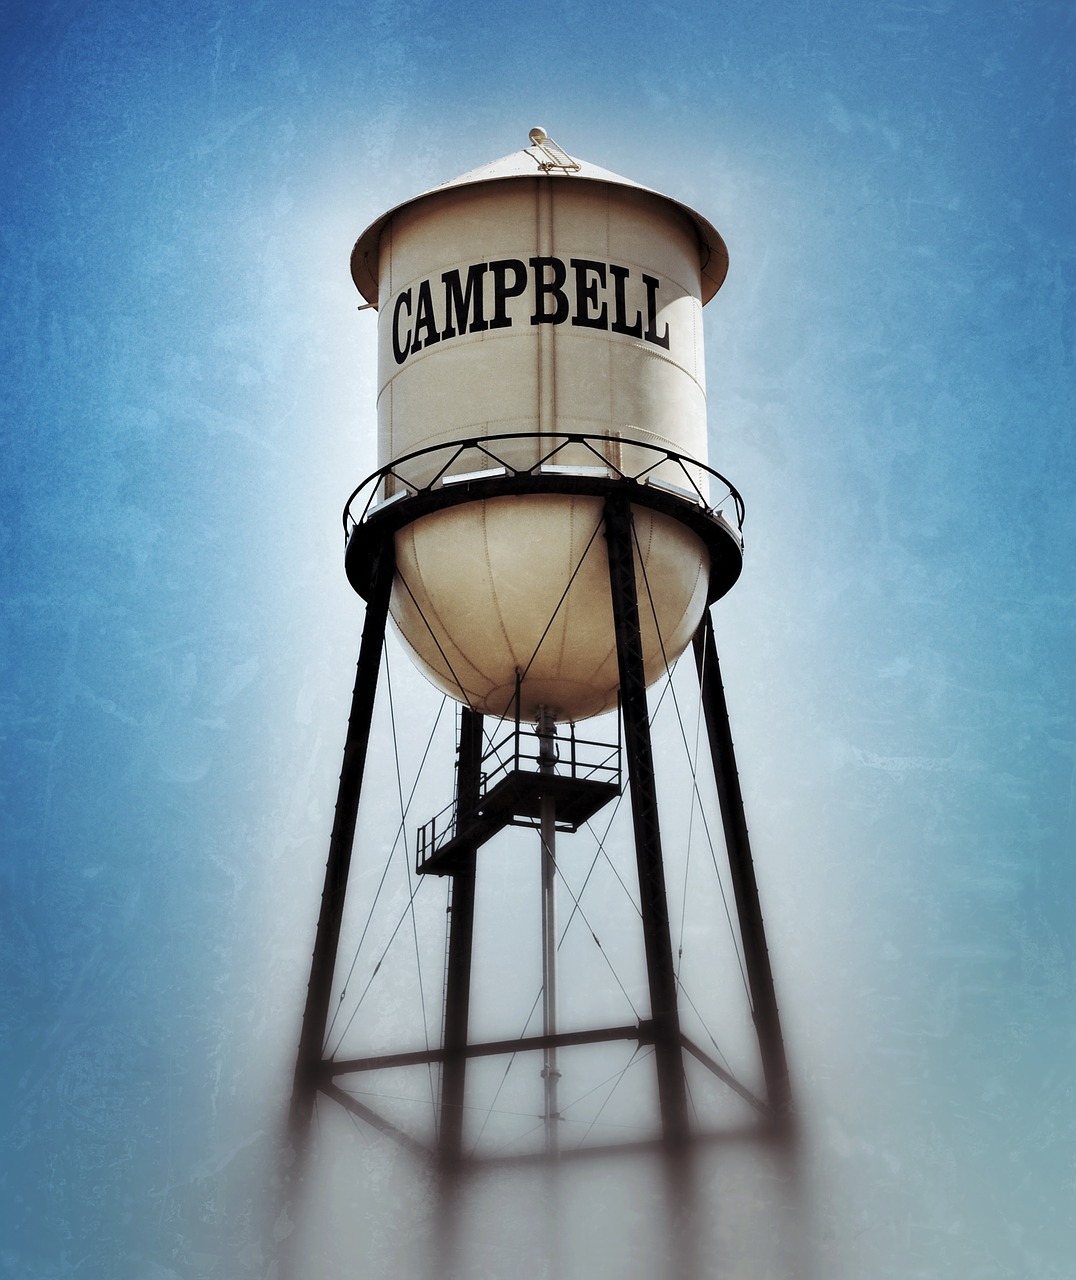 campbell california campbell water tower campbell landmark free photo